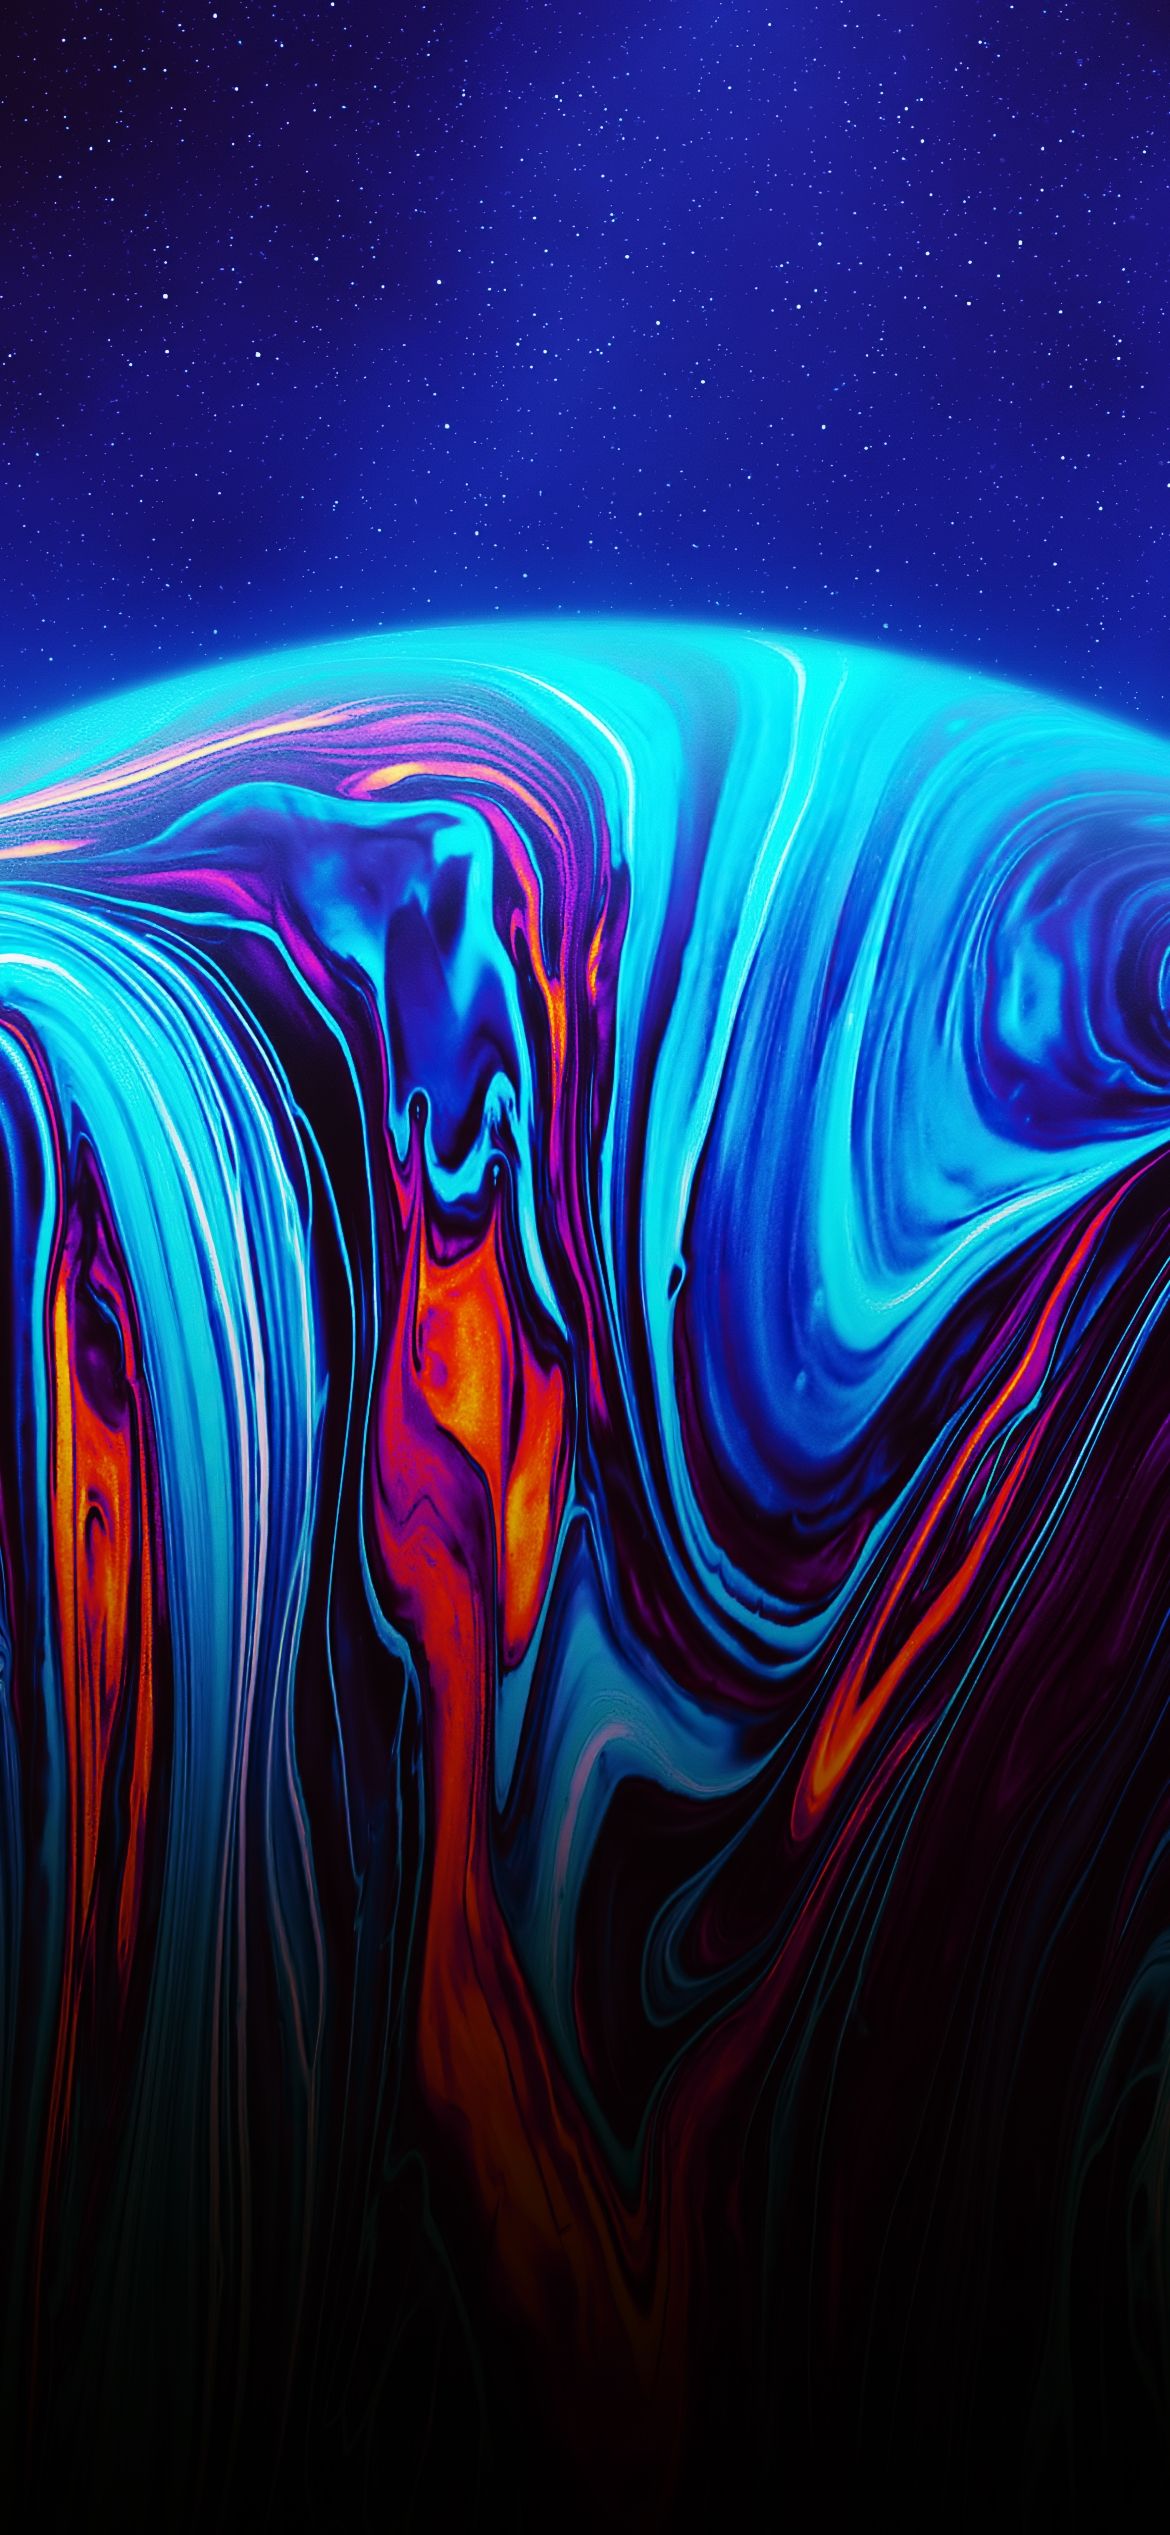 A blue and purple abstract artwork - Planet